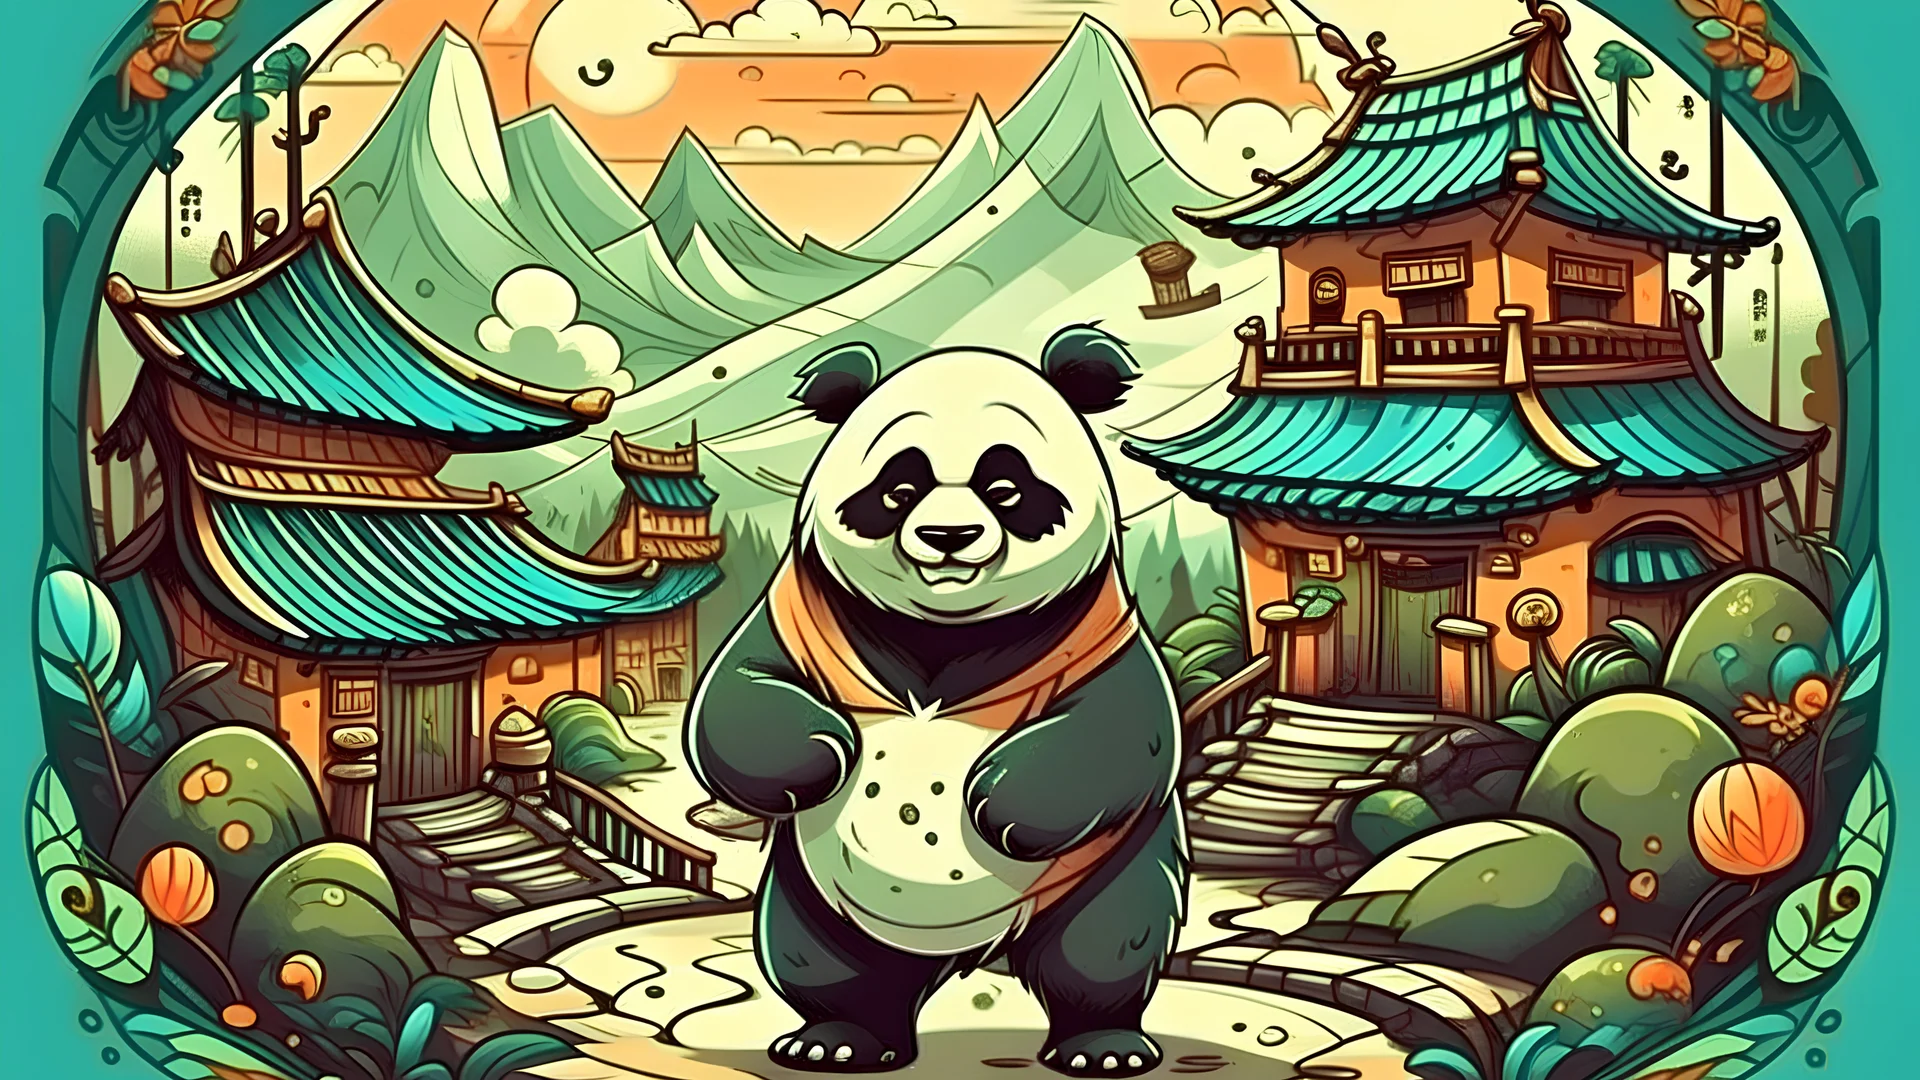 fantasy cartoon style illustration: wise panda in a chinese village